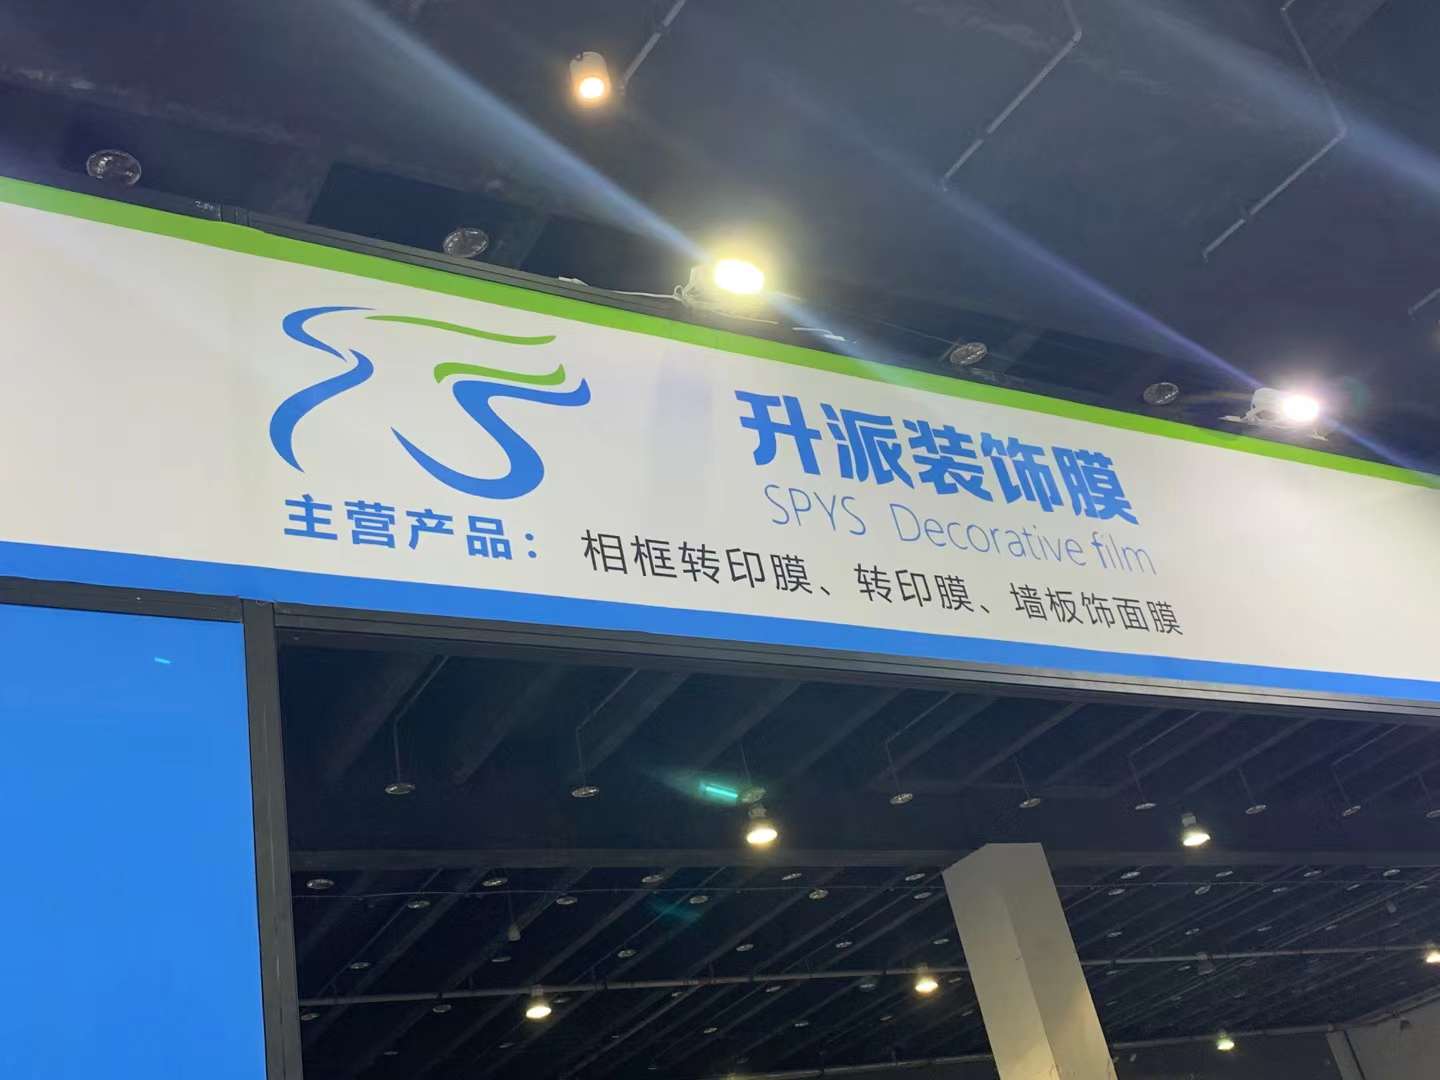 Yiwu Custom Furniture Expo was officially held